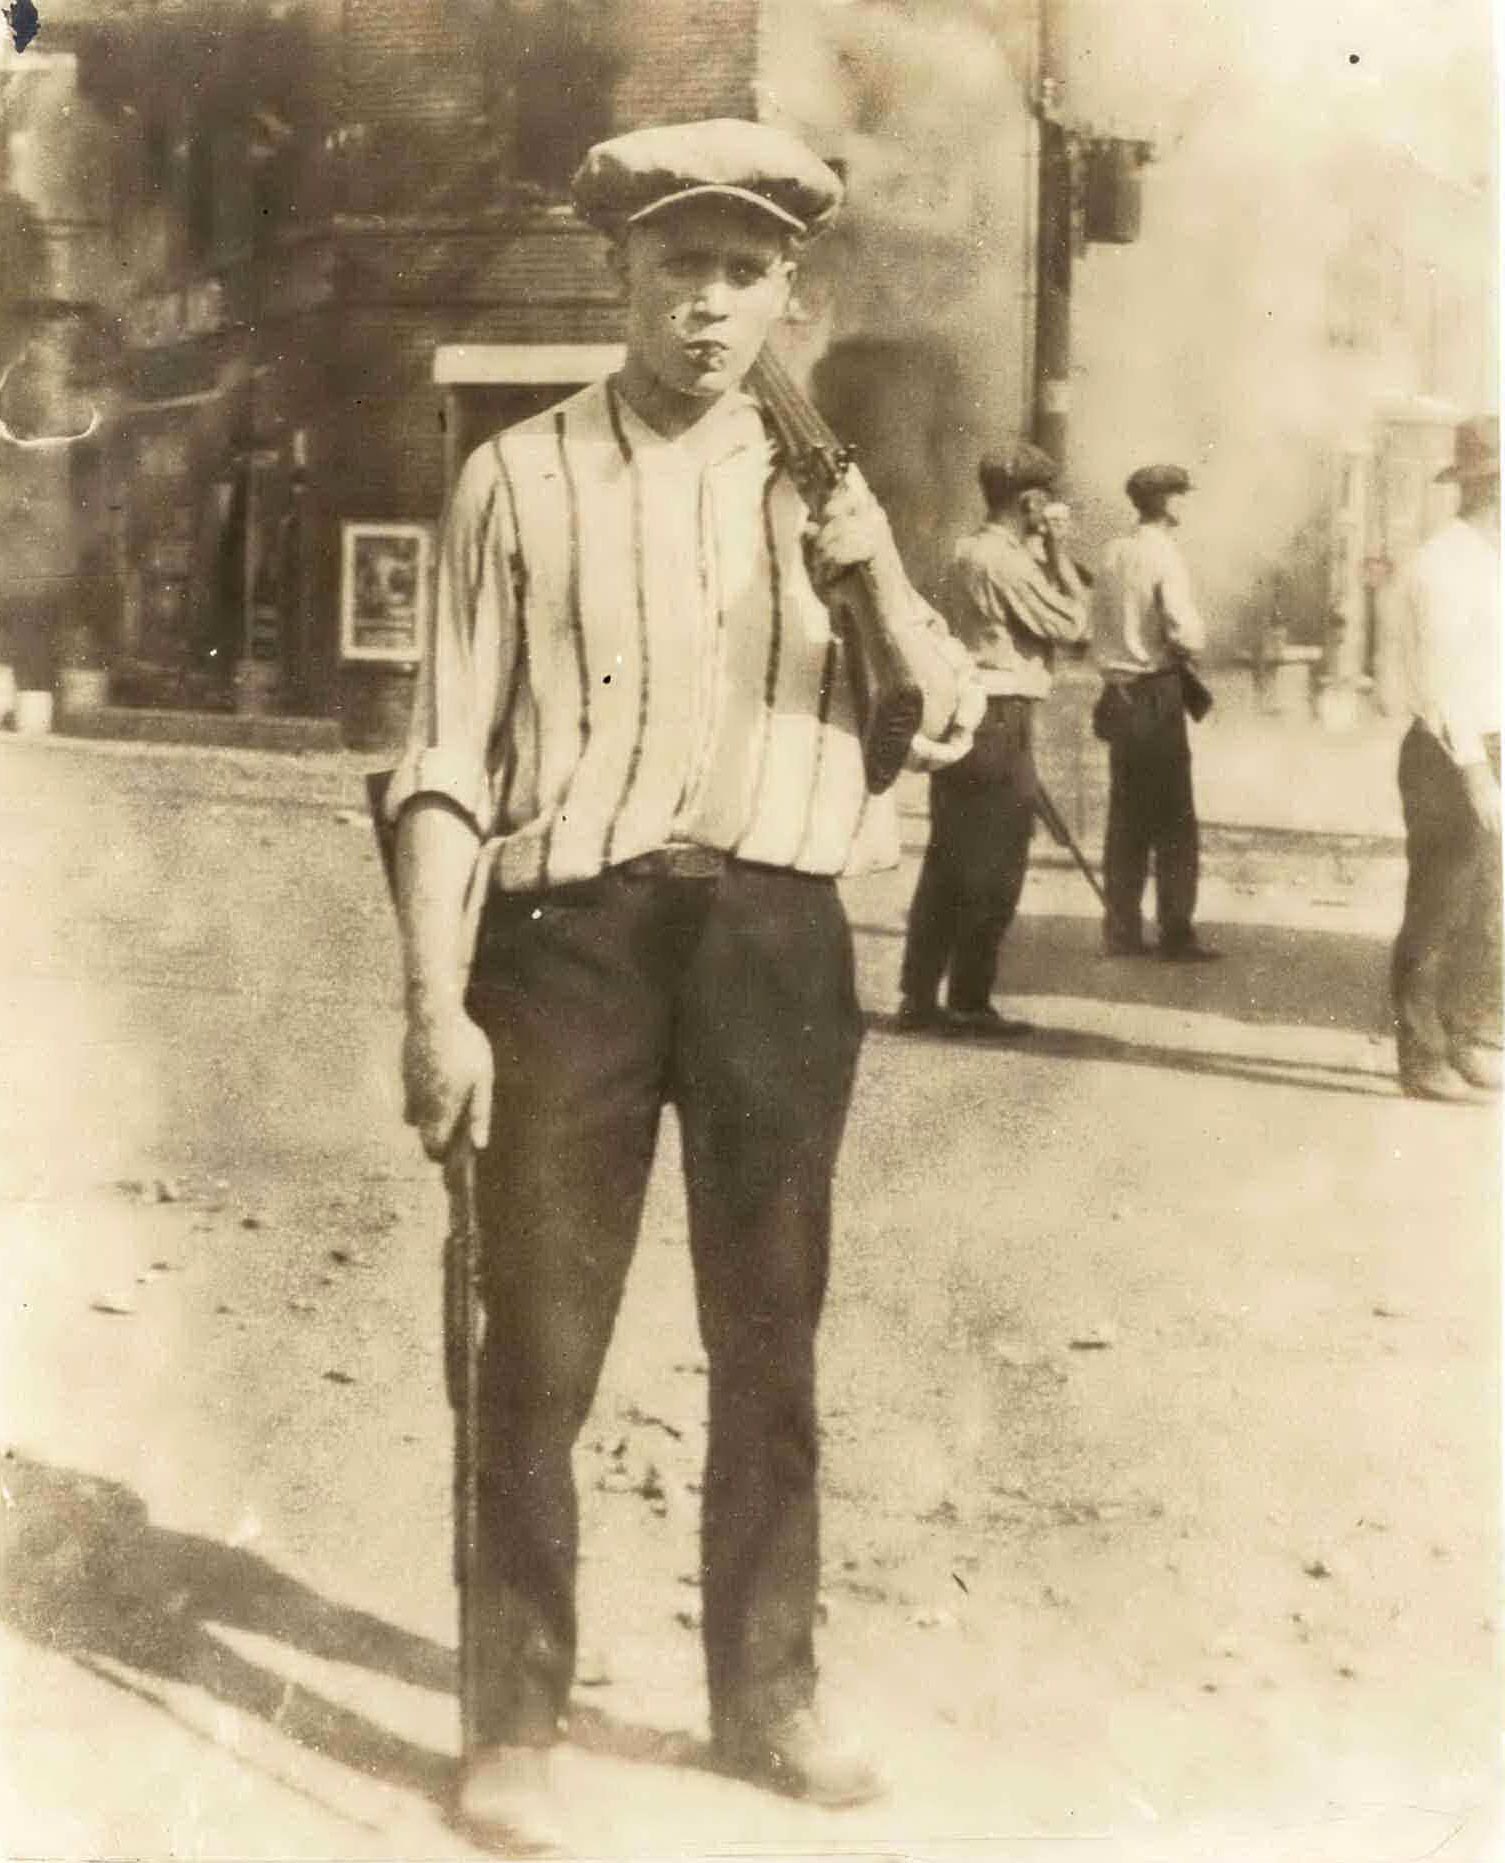 An armed man during the riot.Tulsa Historical Society